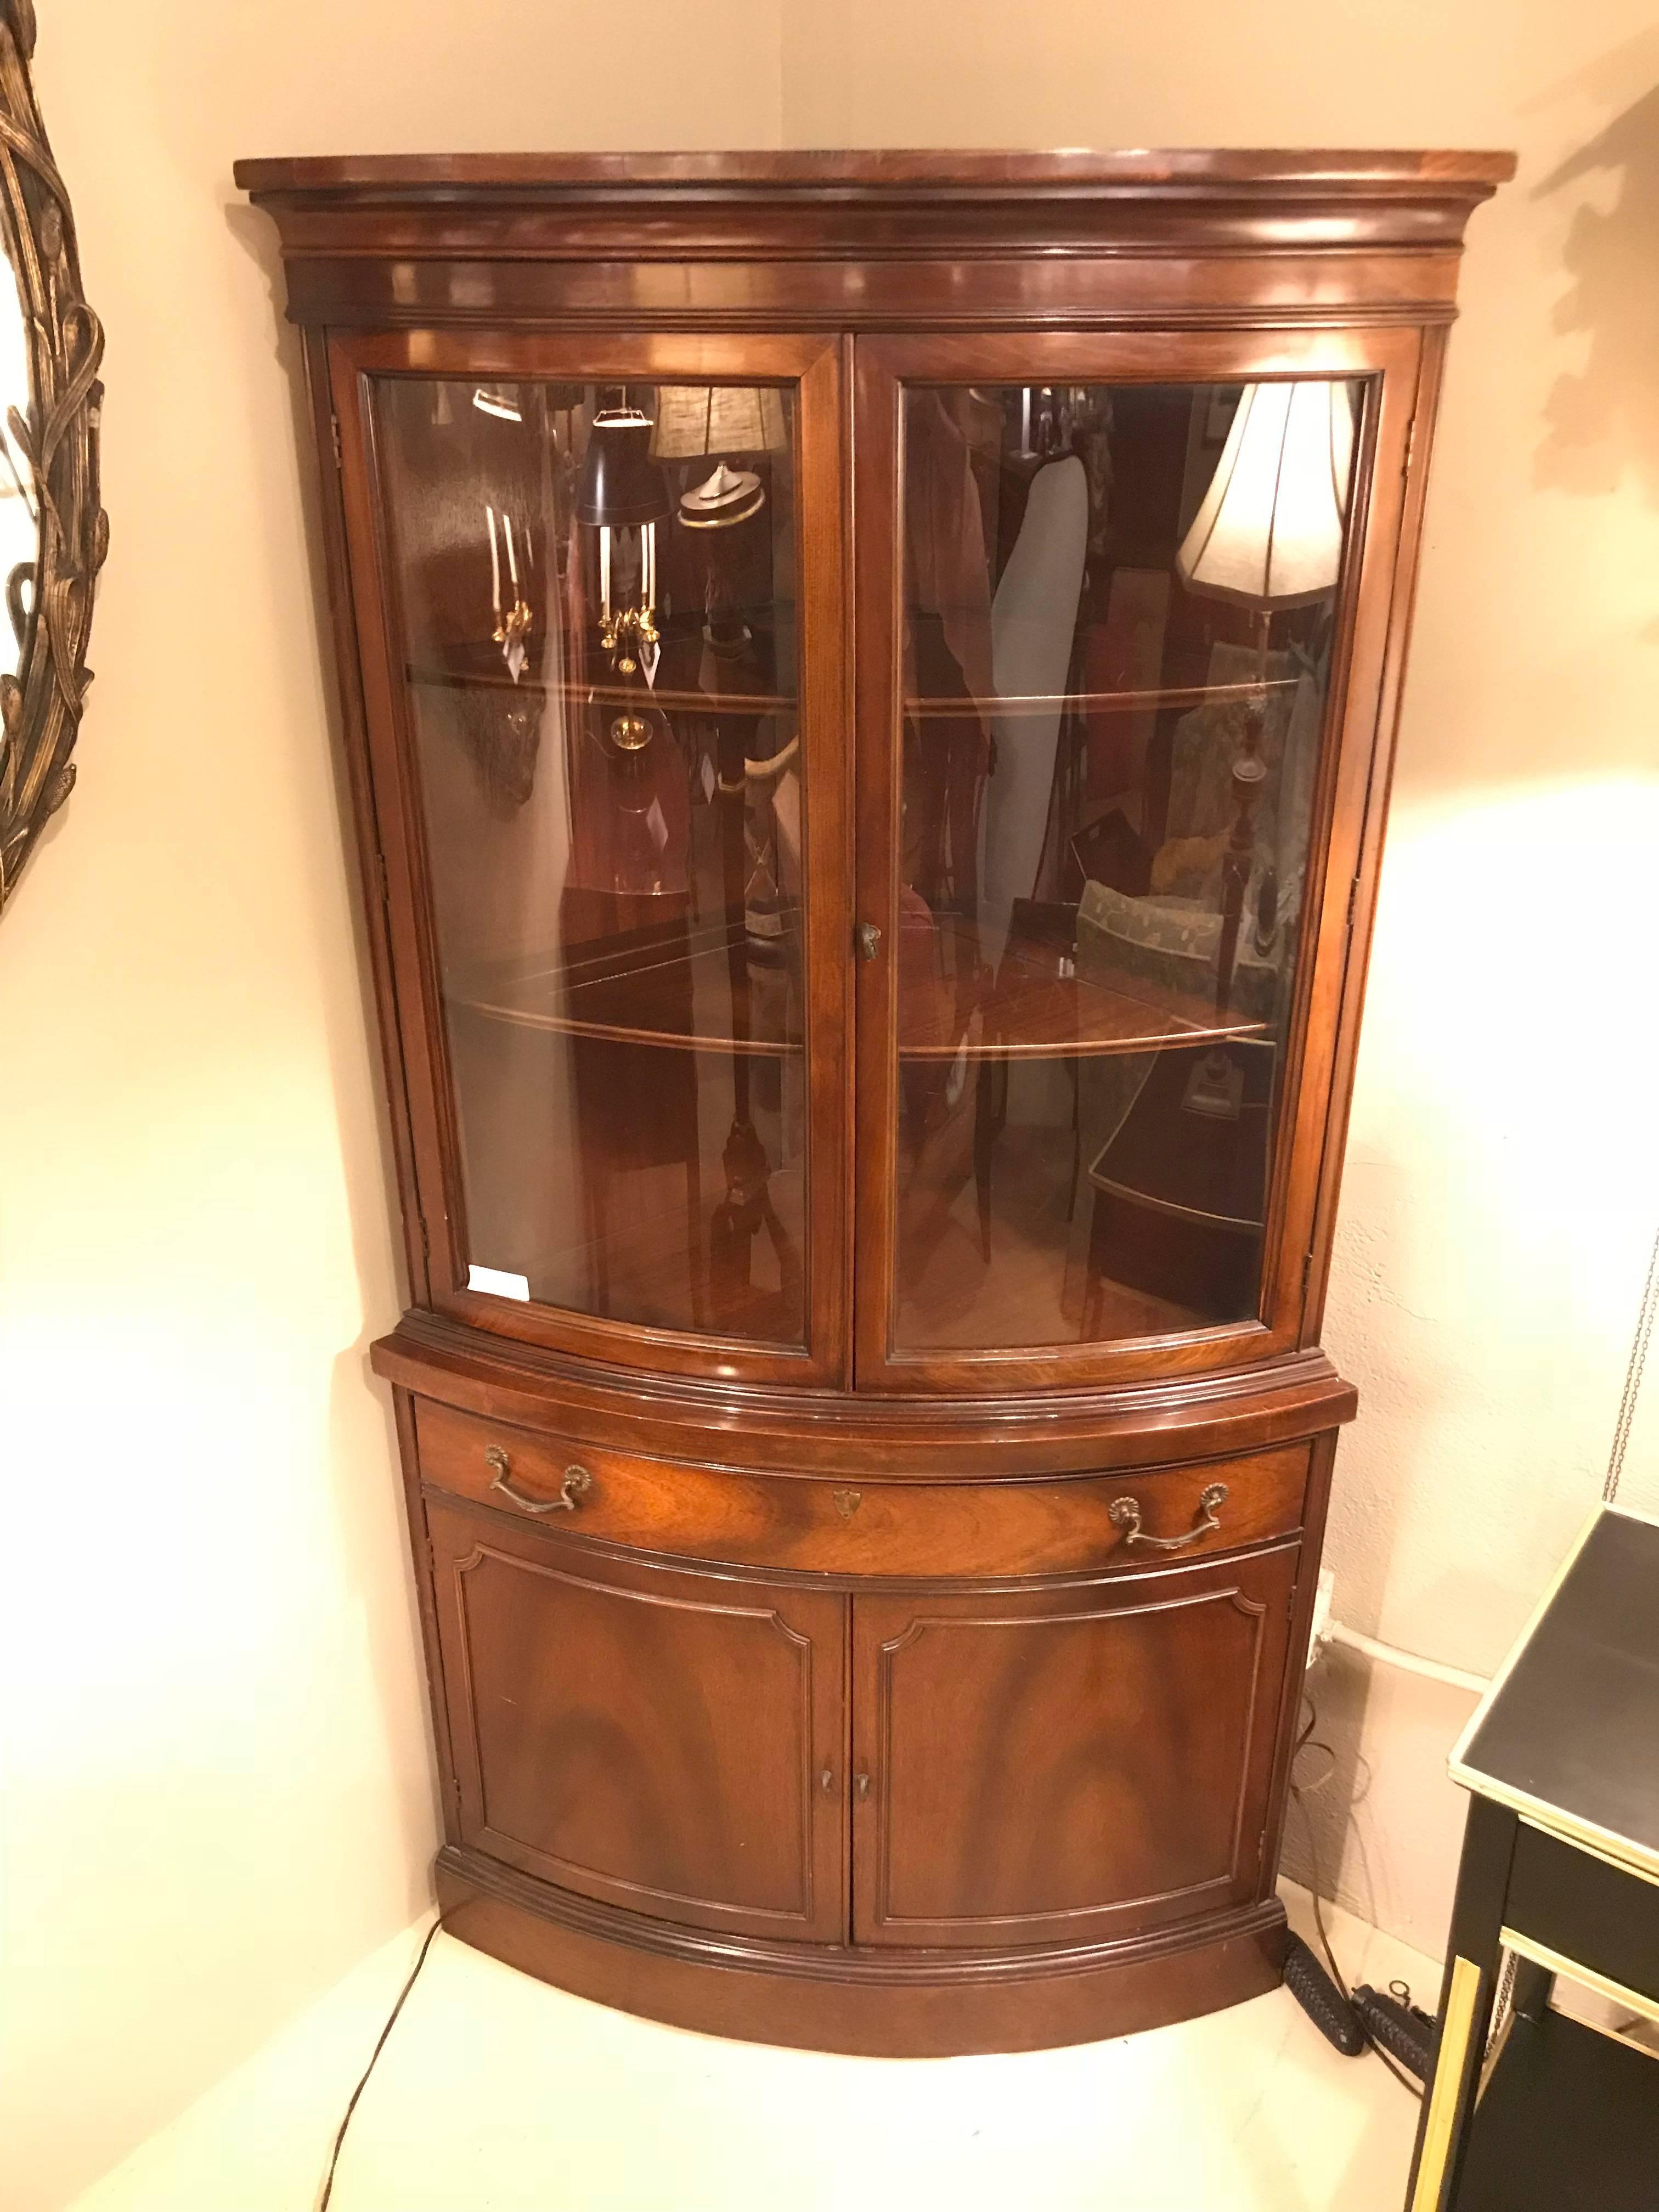 Pair of Georgian style flame mahogany two-door bow front corner cabinets. Each of these fine custom quality corner cabinets hide wonderfully and take up very little room as they sit snugly in any corner of the home or dining area. The bow front